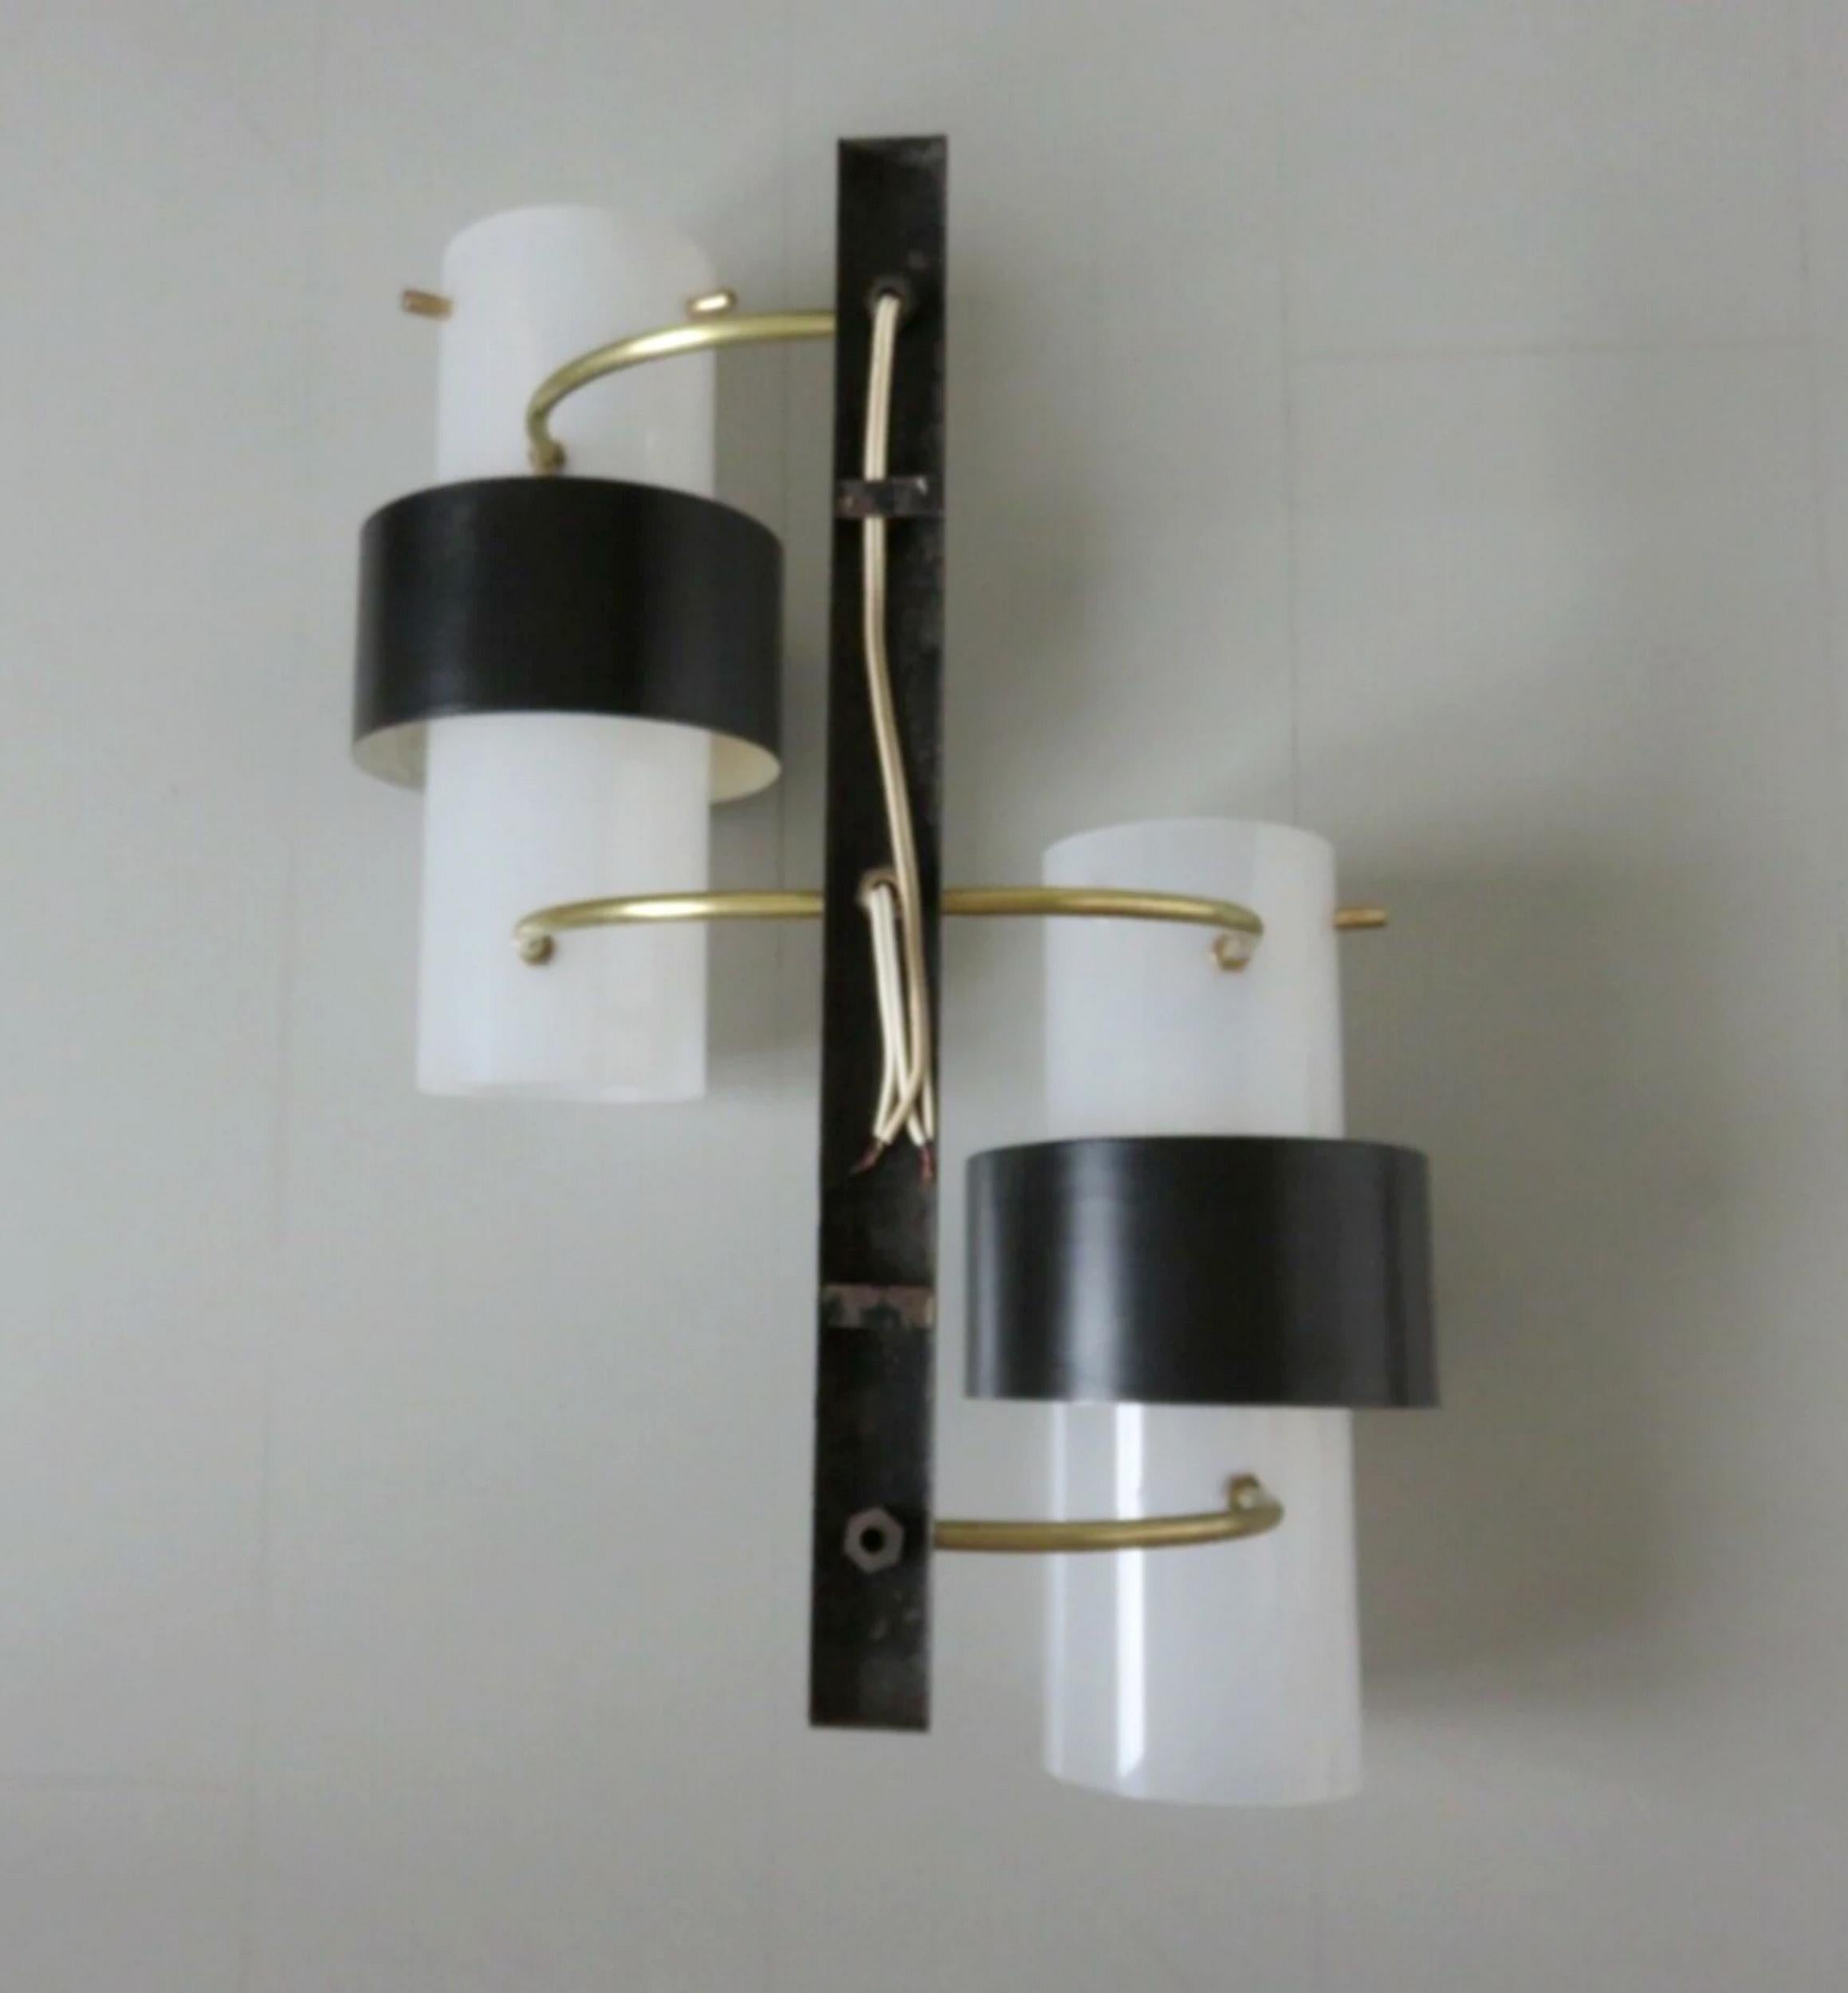 Double wall lamp in perspex, brass and black-lacquered metal, designed by Royal Lumière and published by Maison Lunel.
